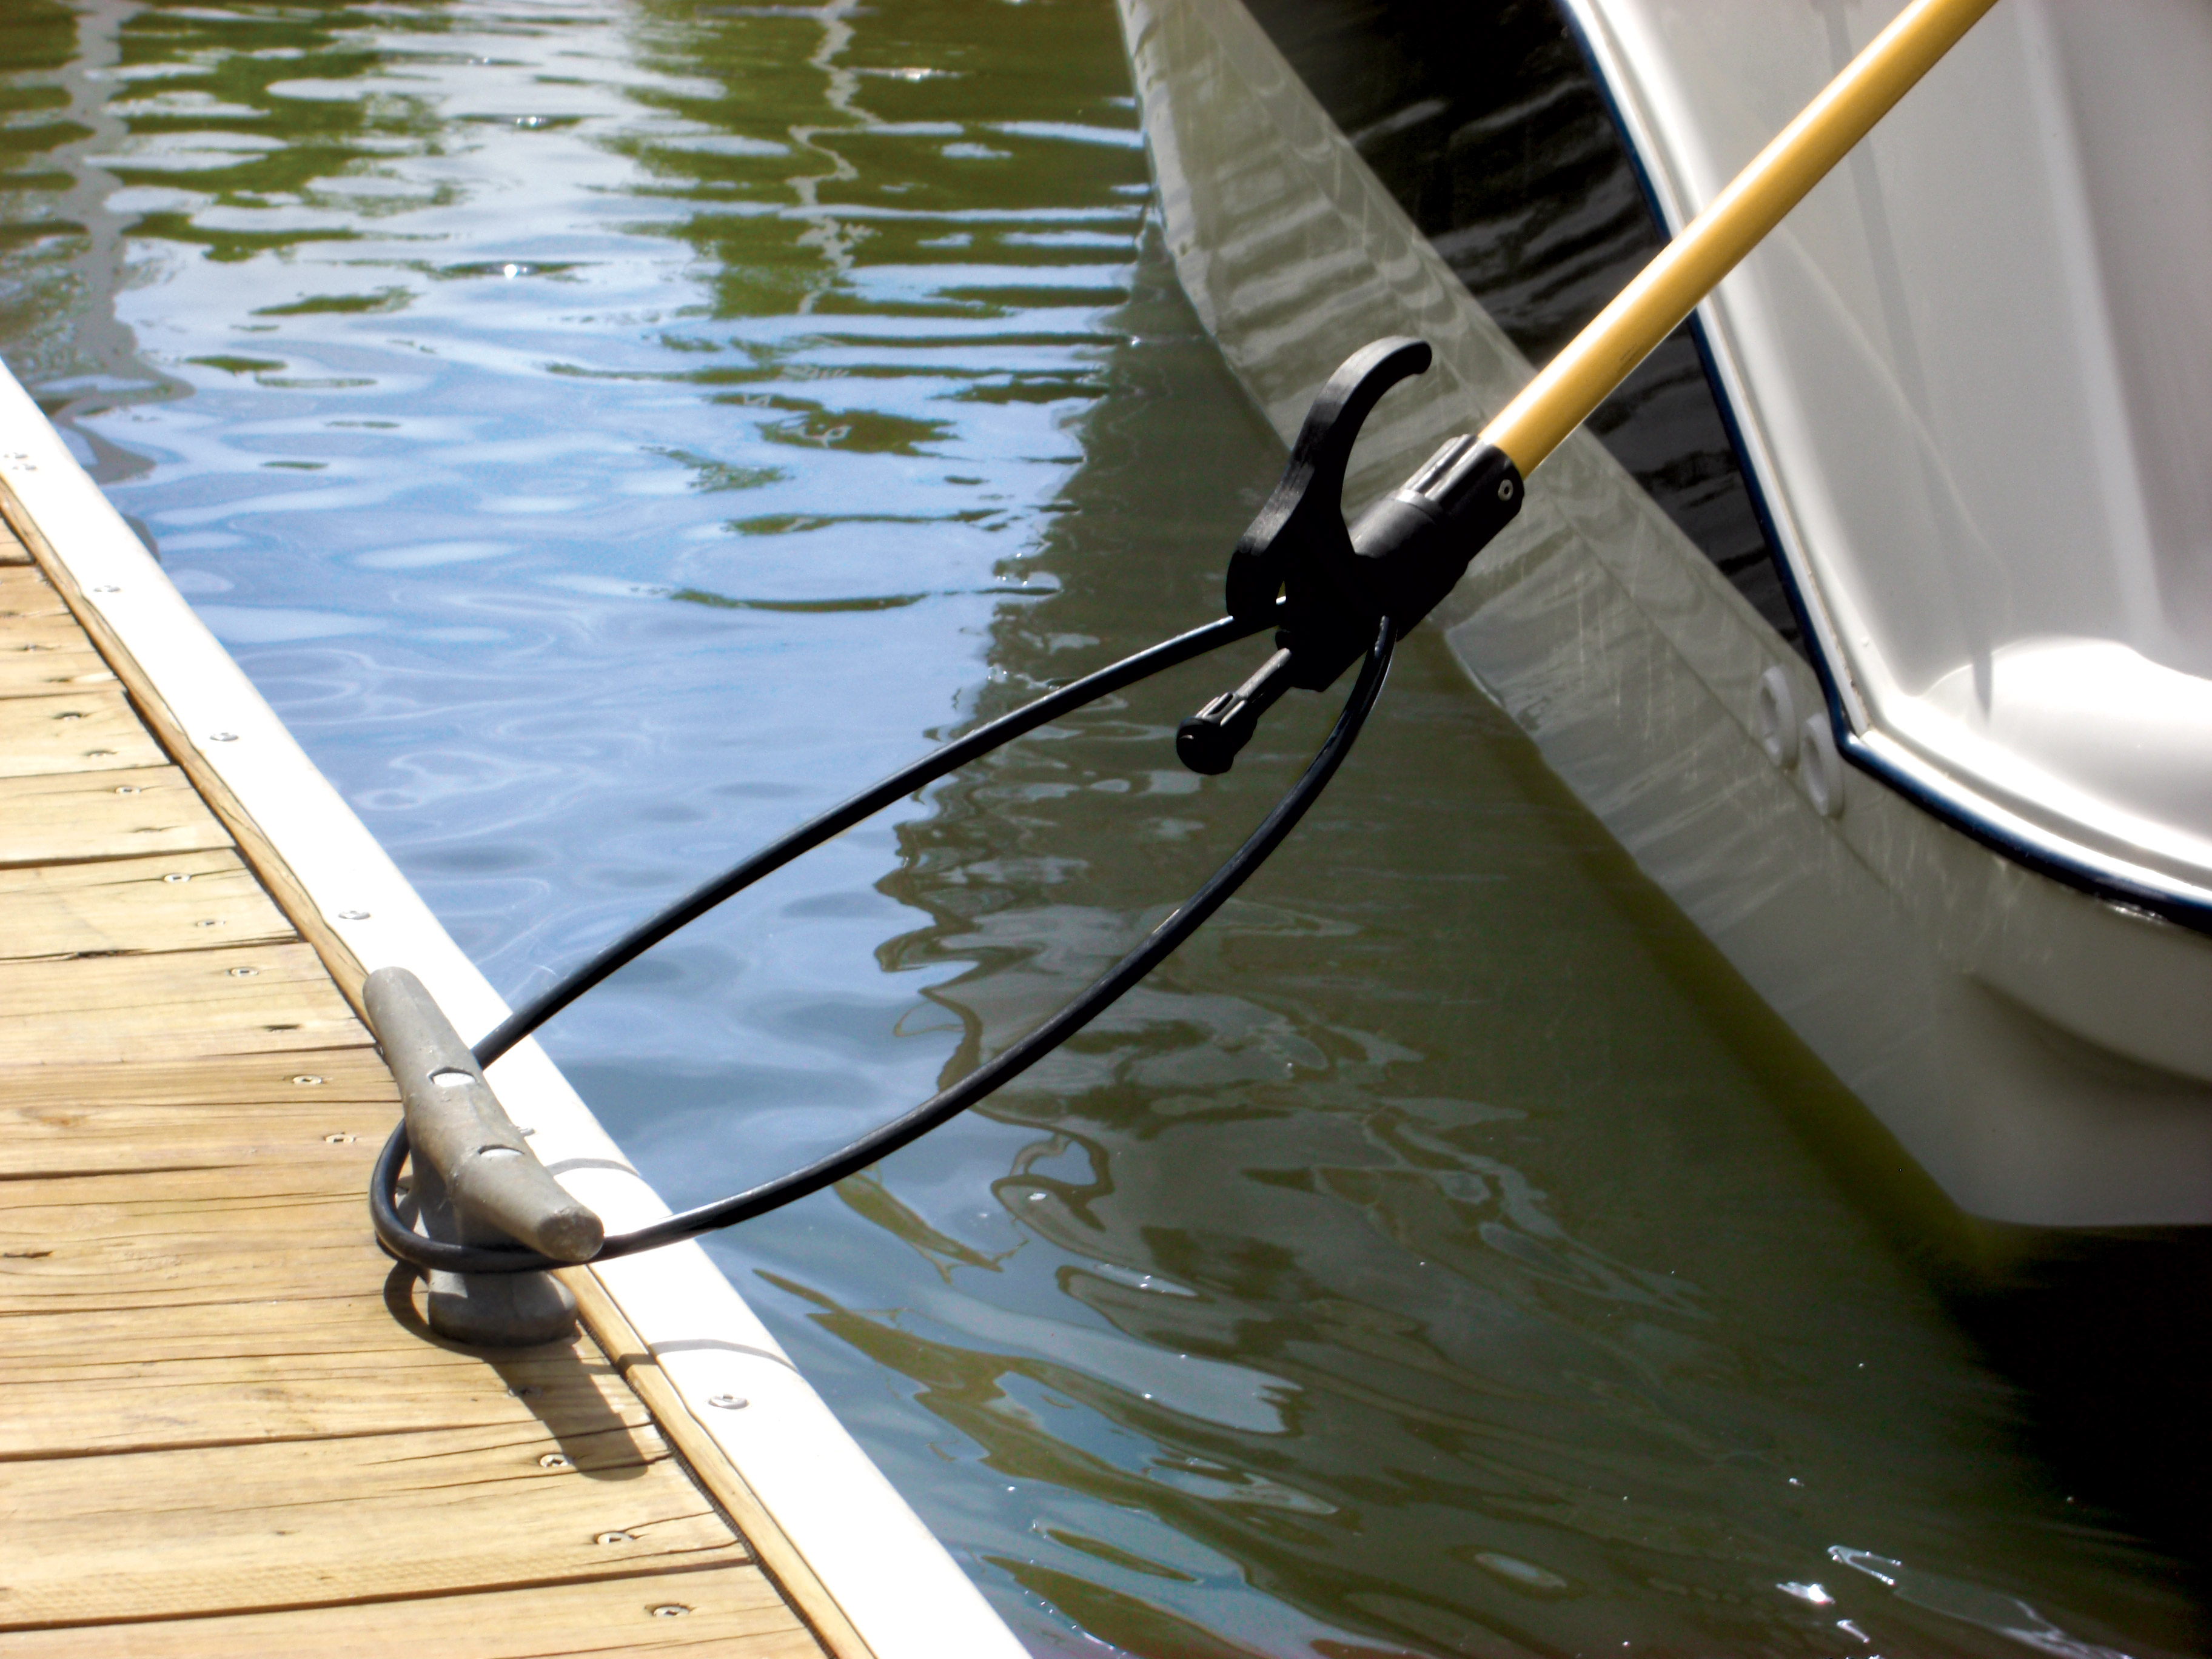 how to dock a sailboat by yourself